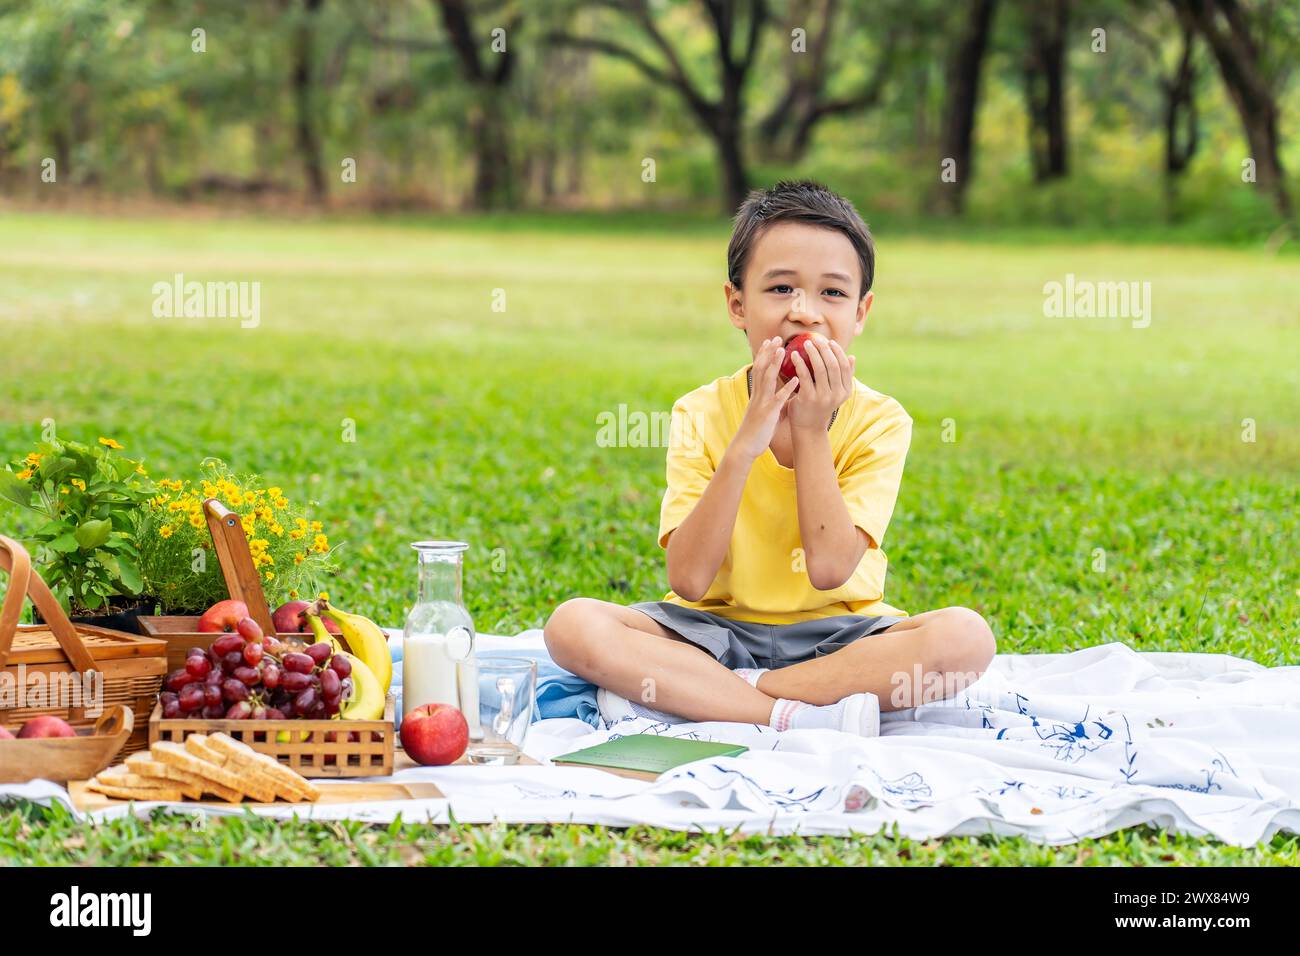 A young man relaxing on grass with snacks and beverages Stock Photo